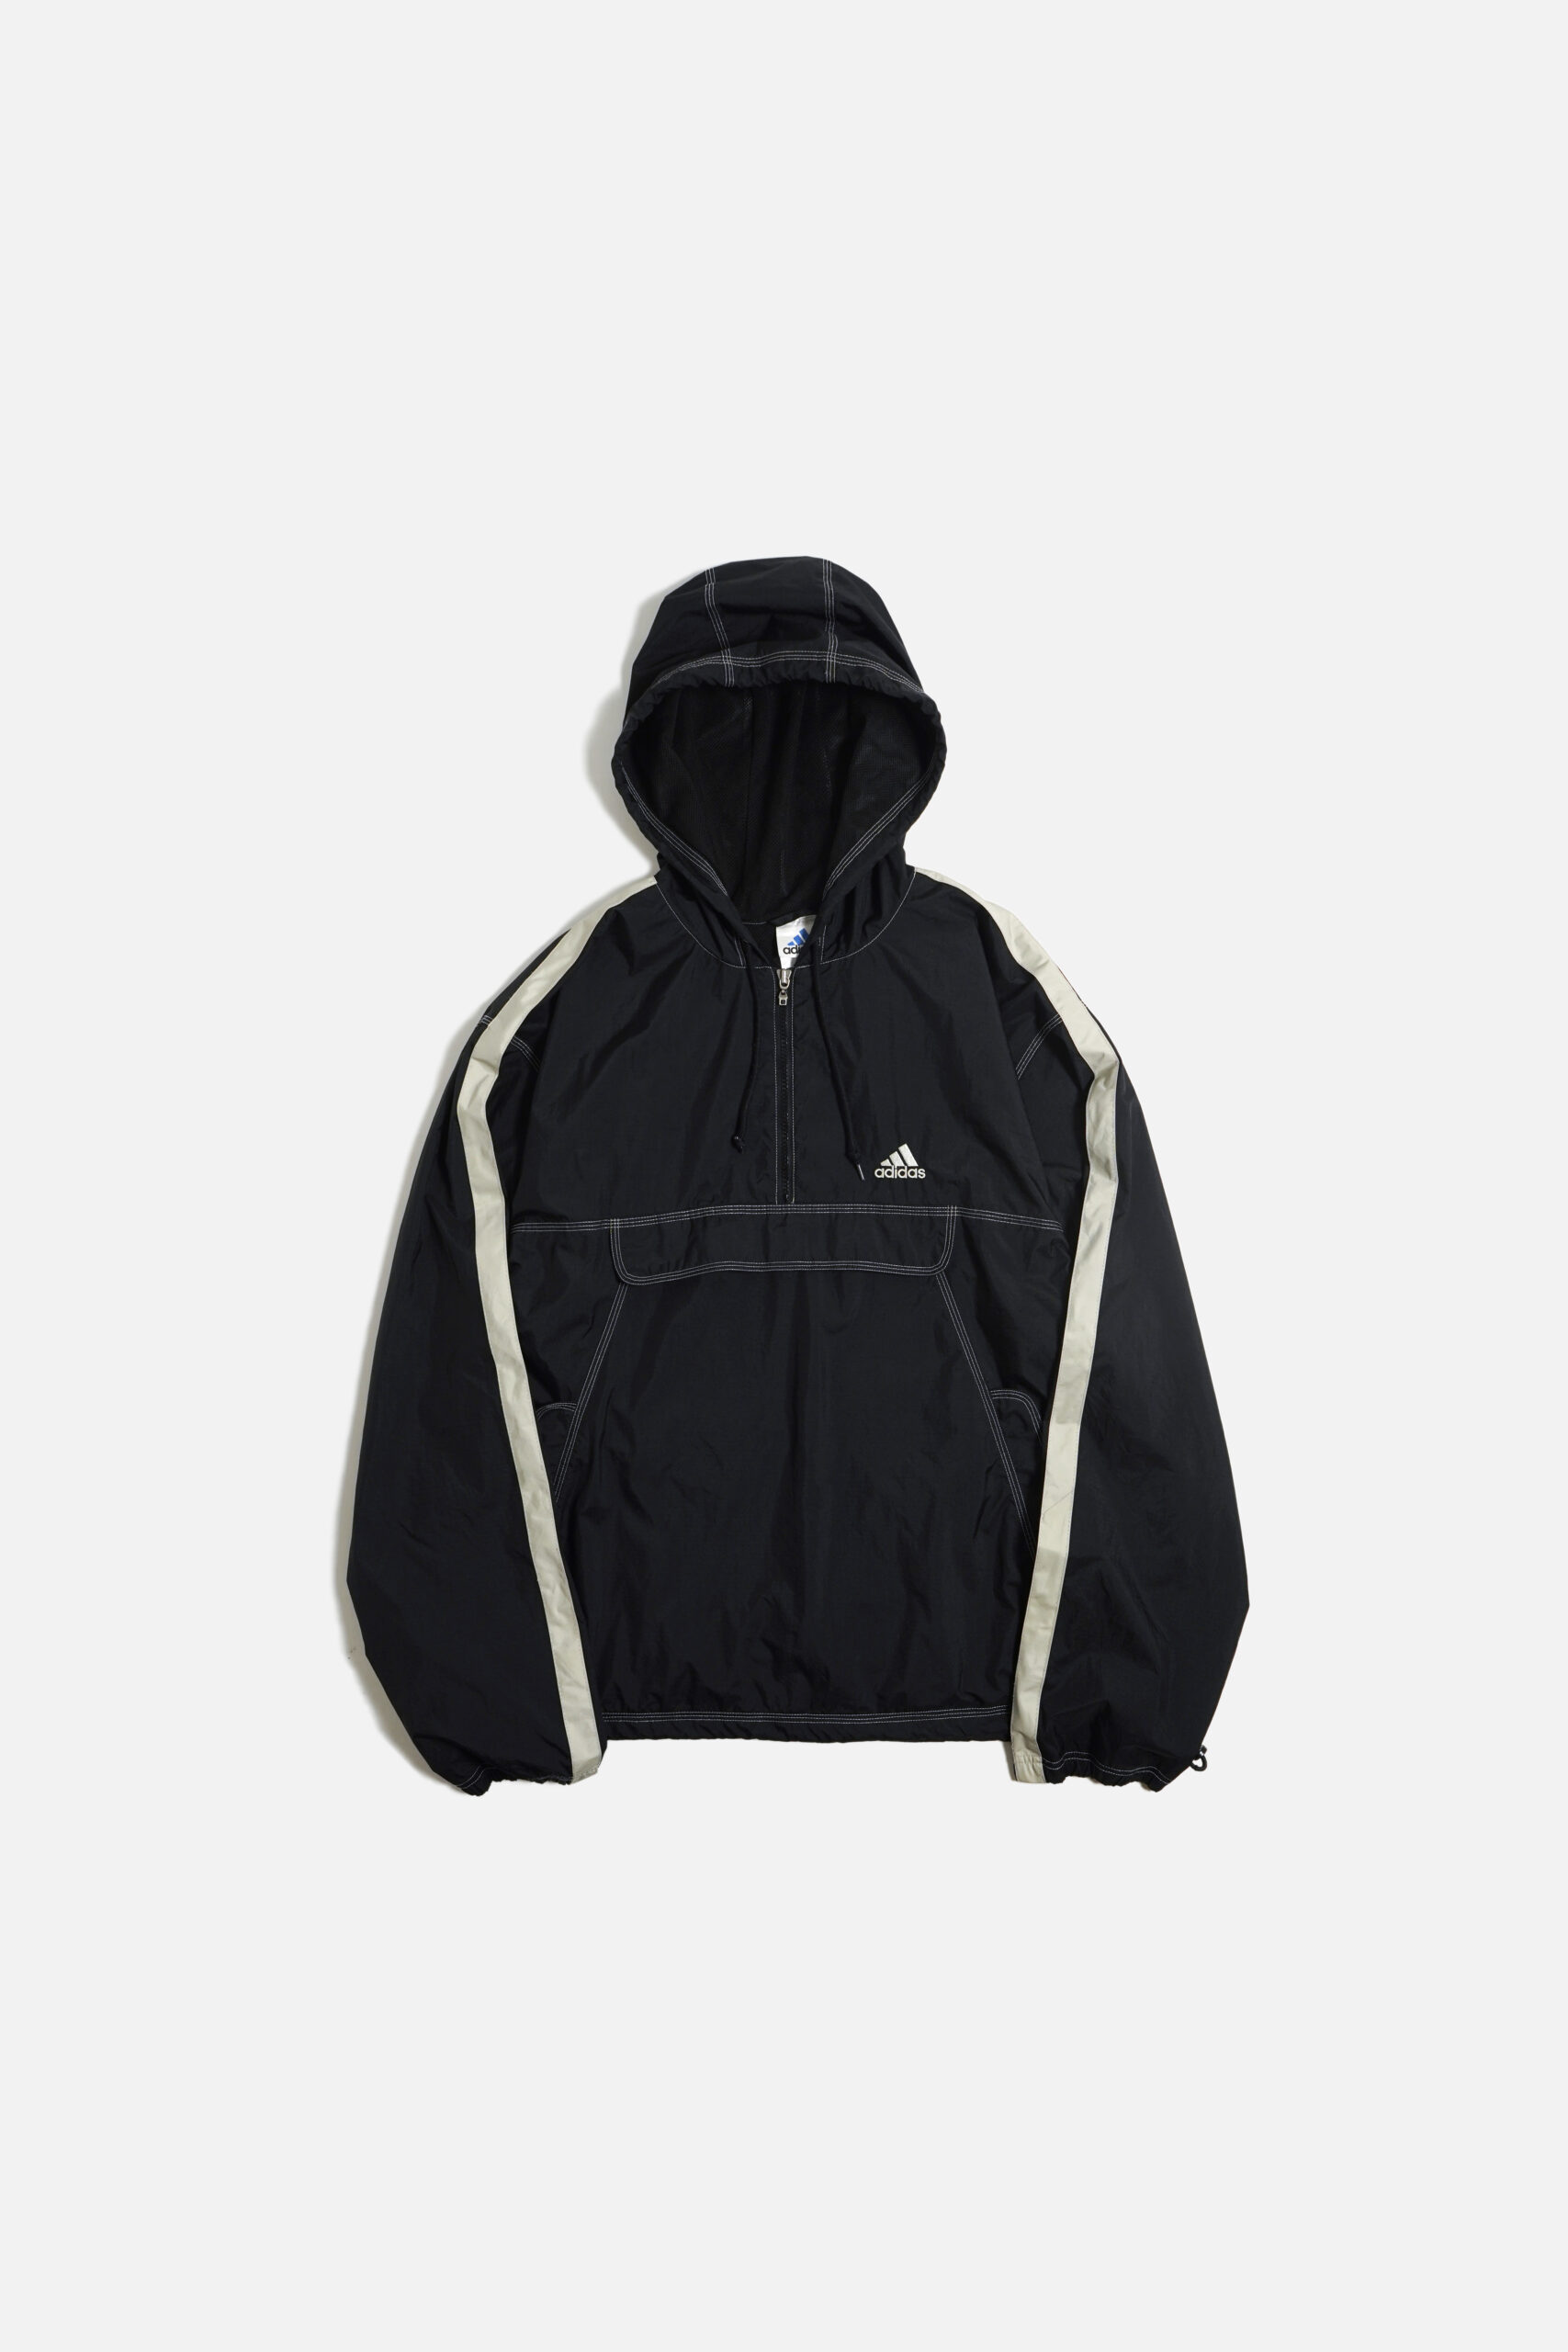 ADIDAS HOODED PULLOVER JACKET WHITE STITCH